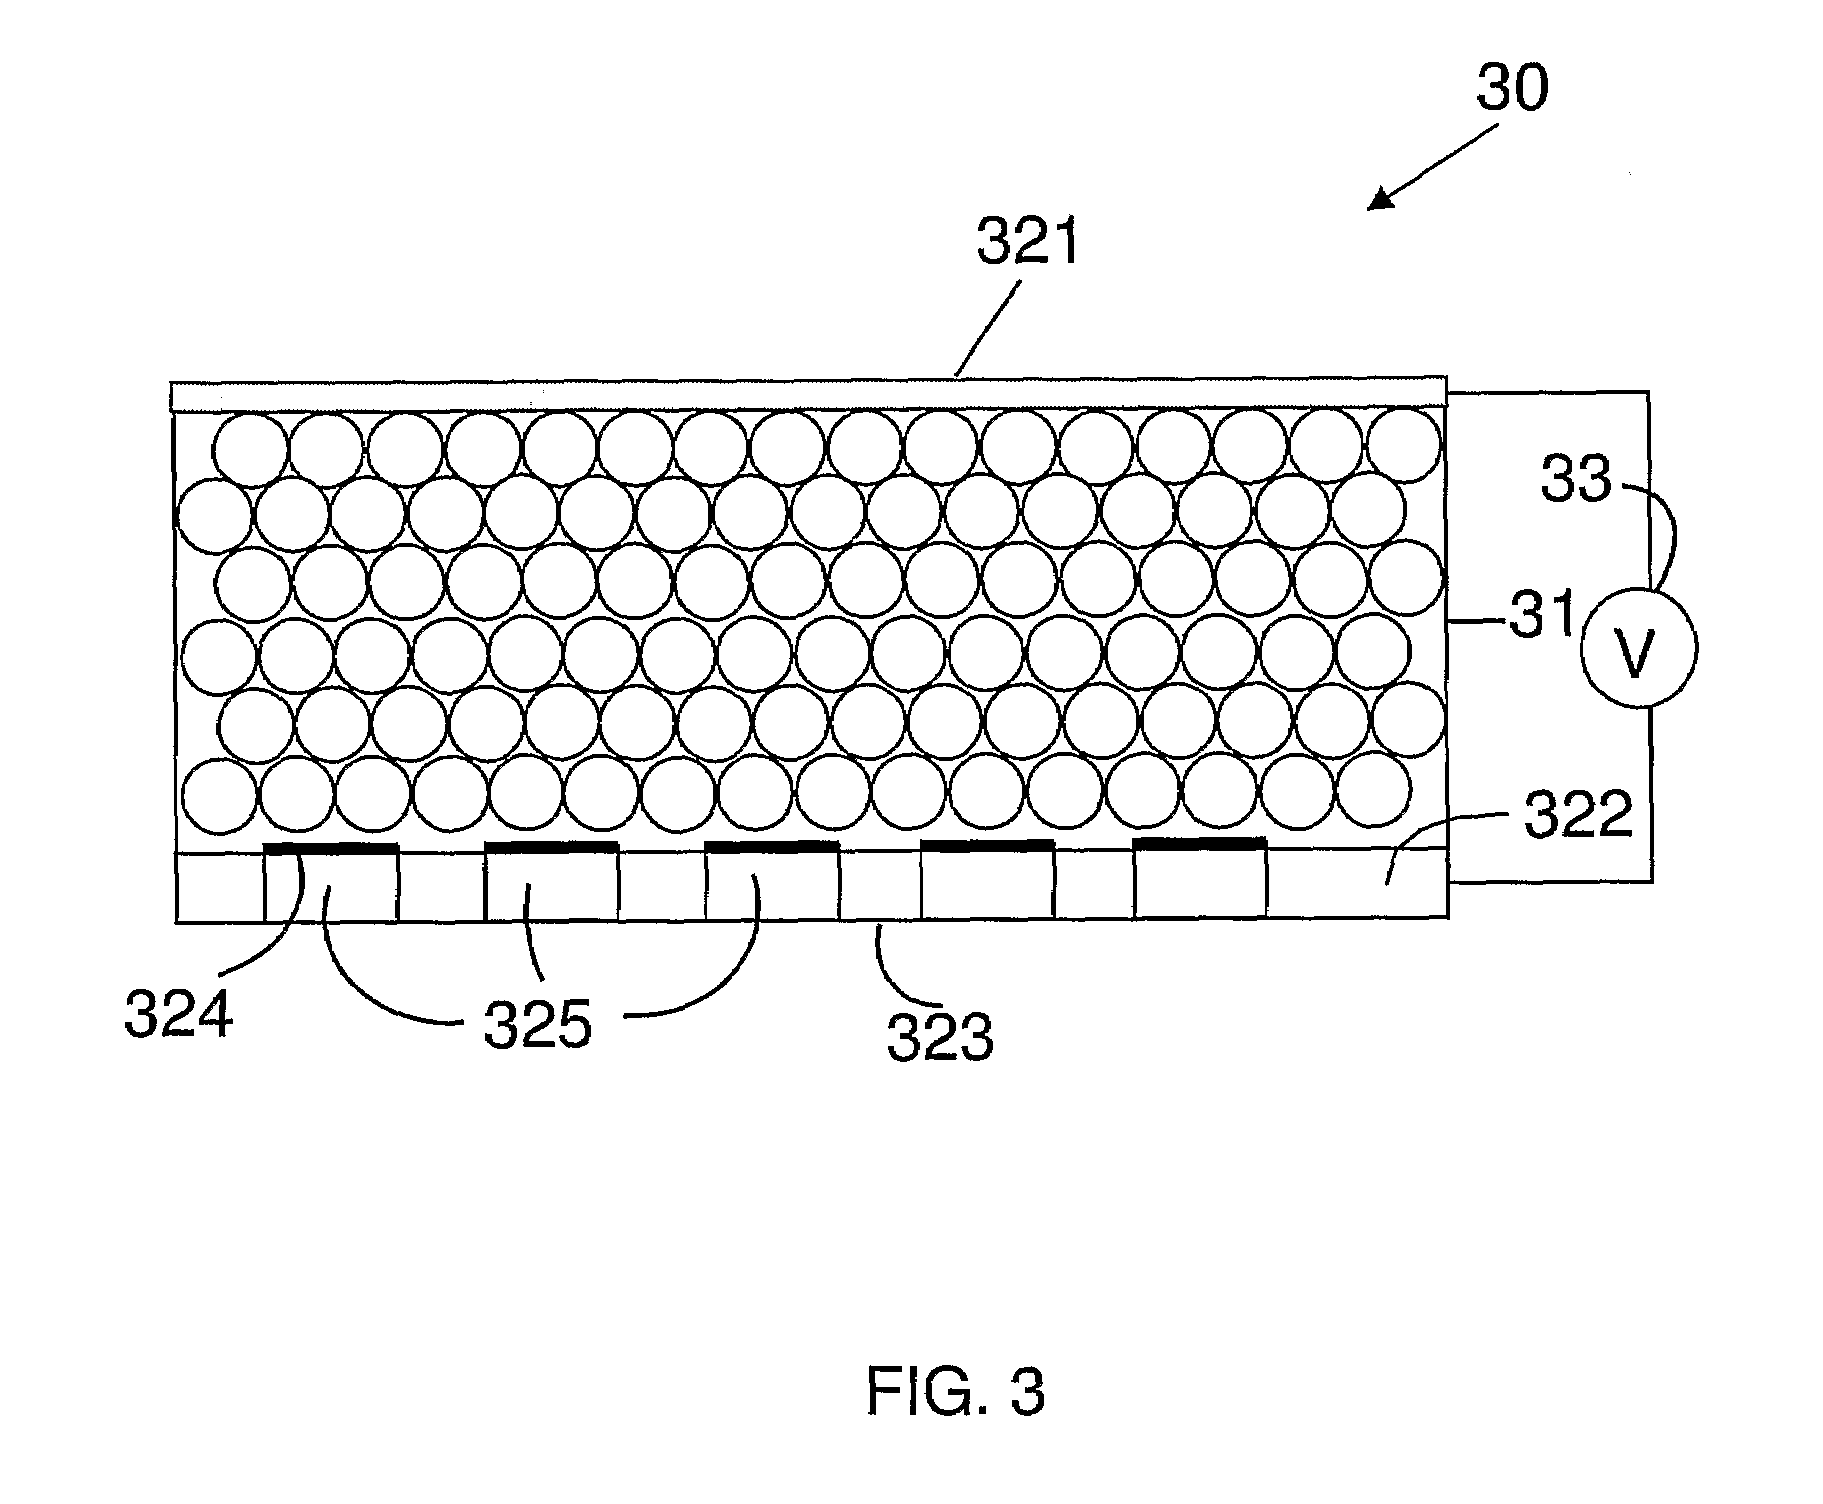 Solid-state neutron and alpha particles detector and methods for manufacturing and use thereof